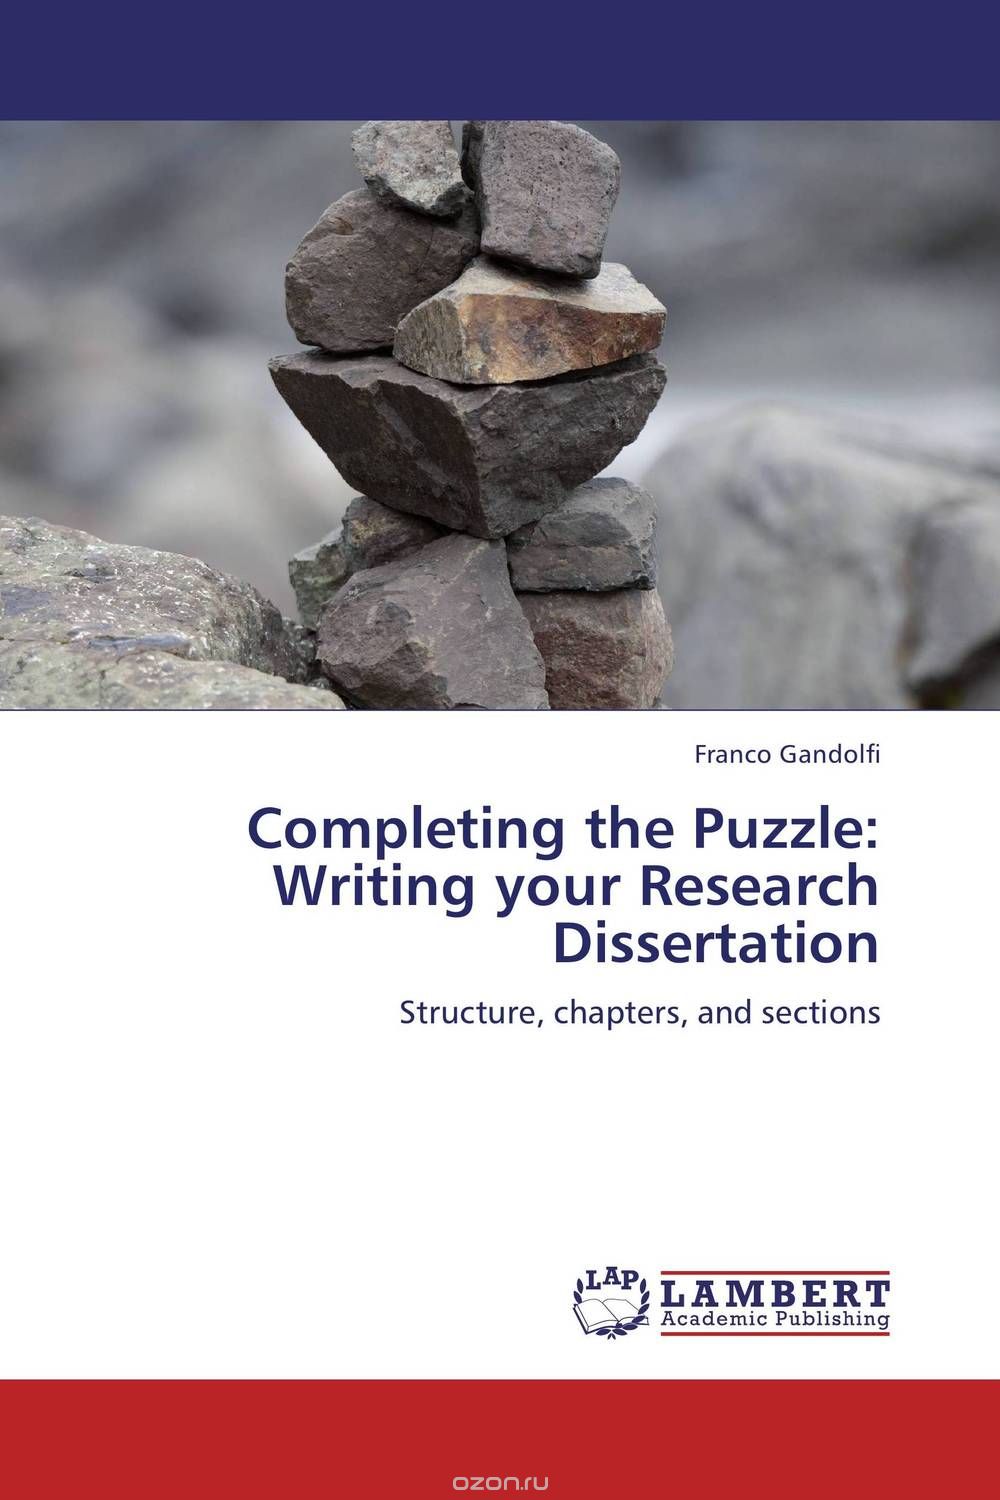 Скачать книгу "Completing the Puzzle: Writing your Research Dissertation"